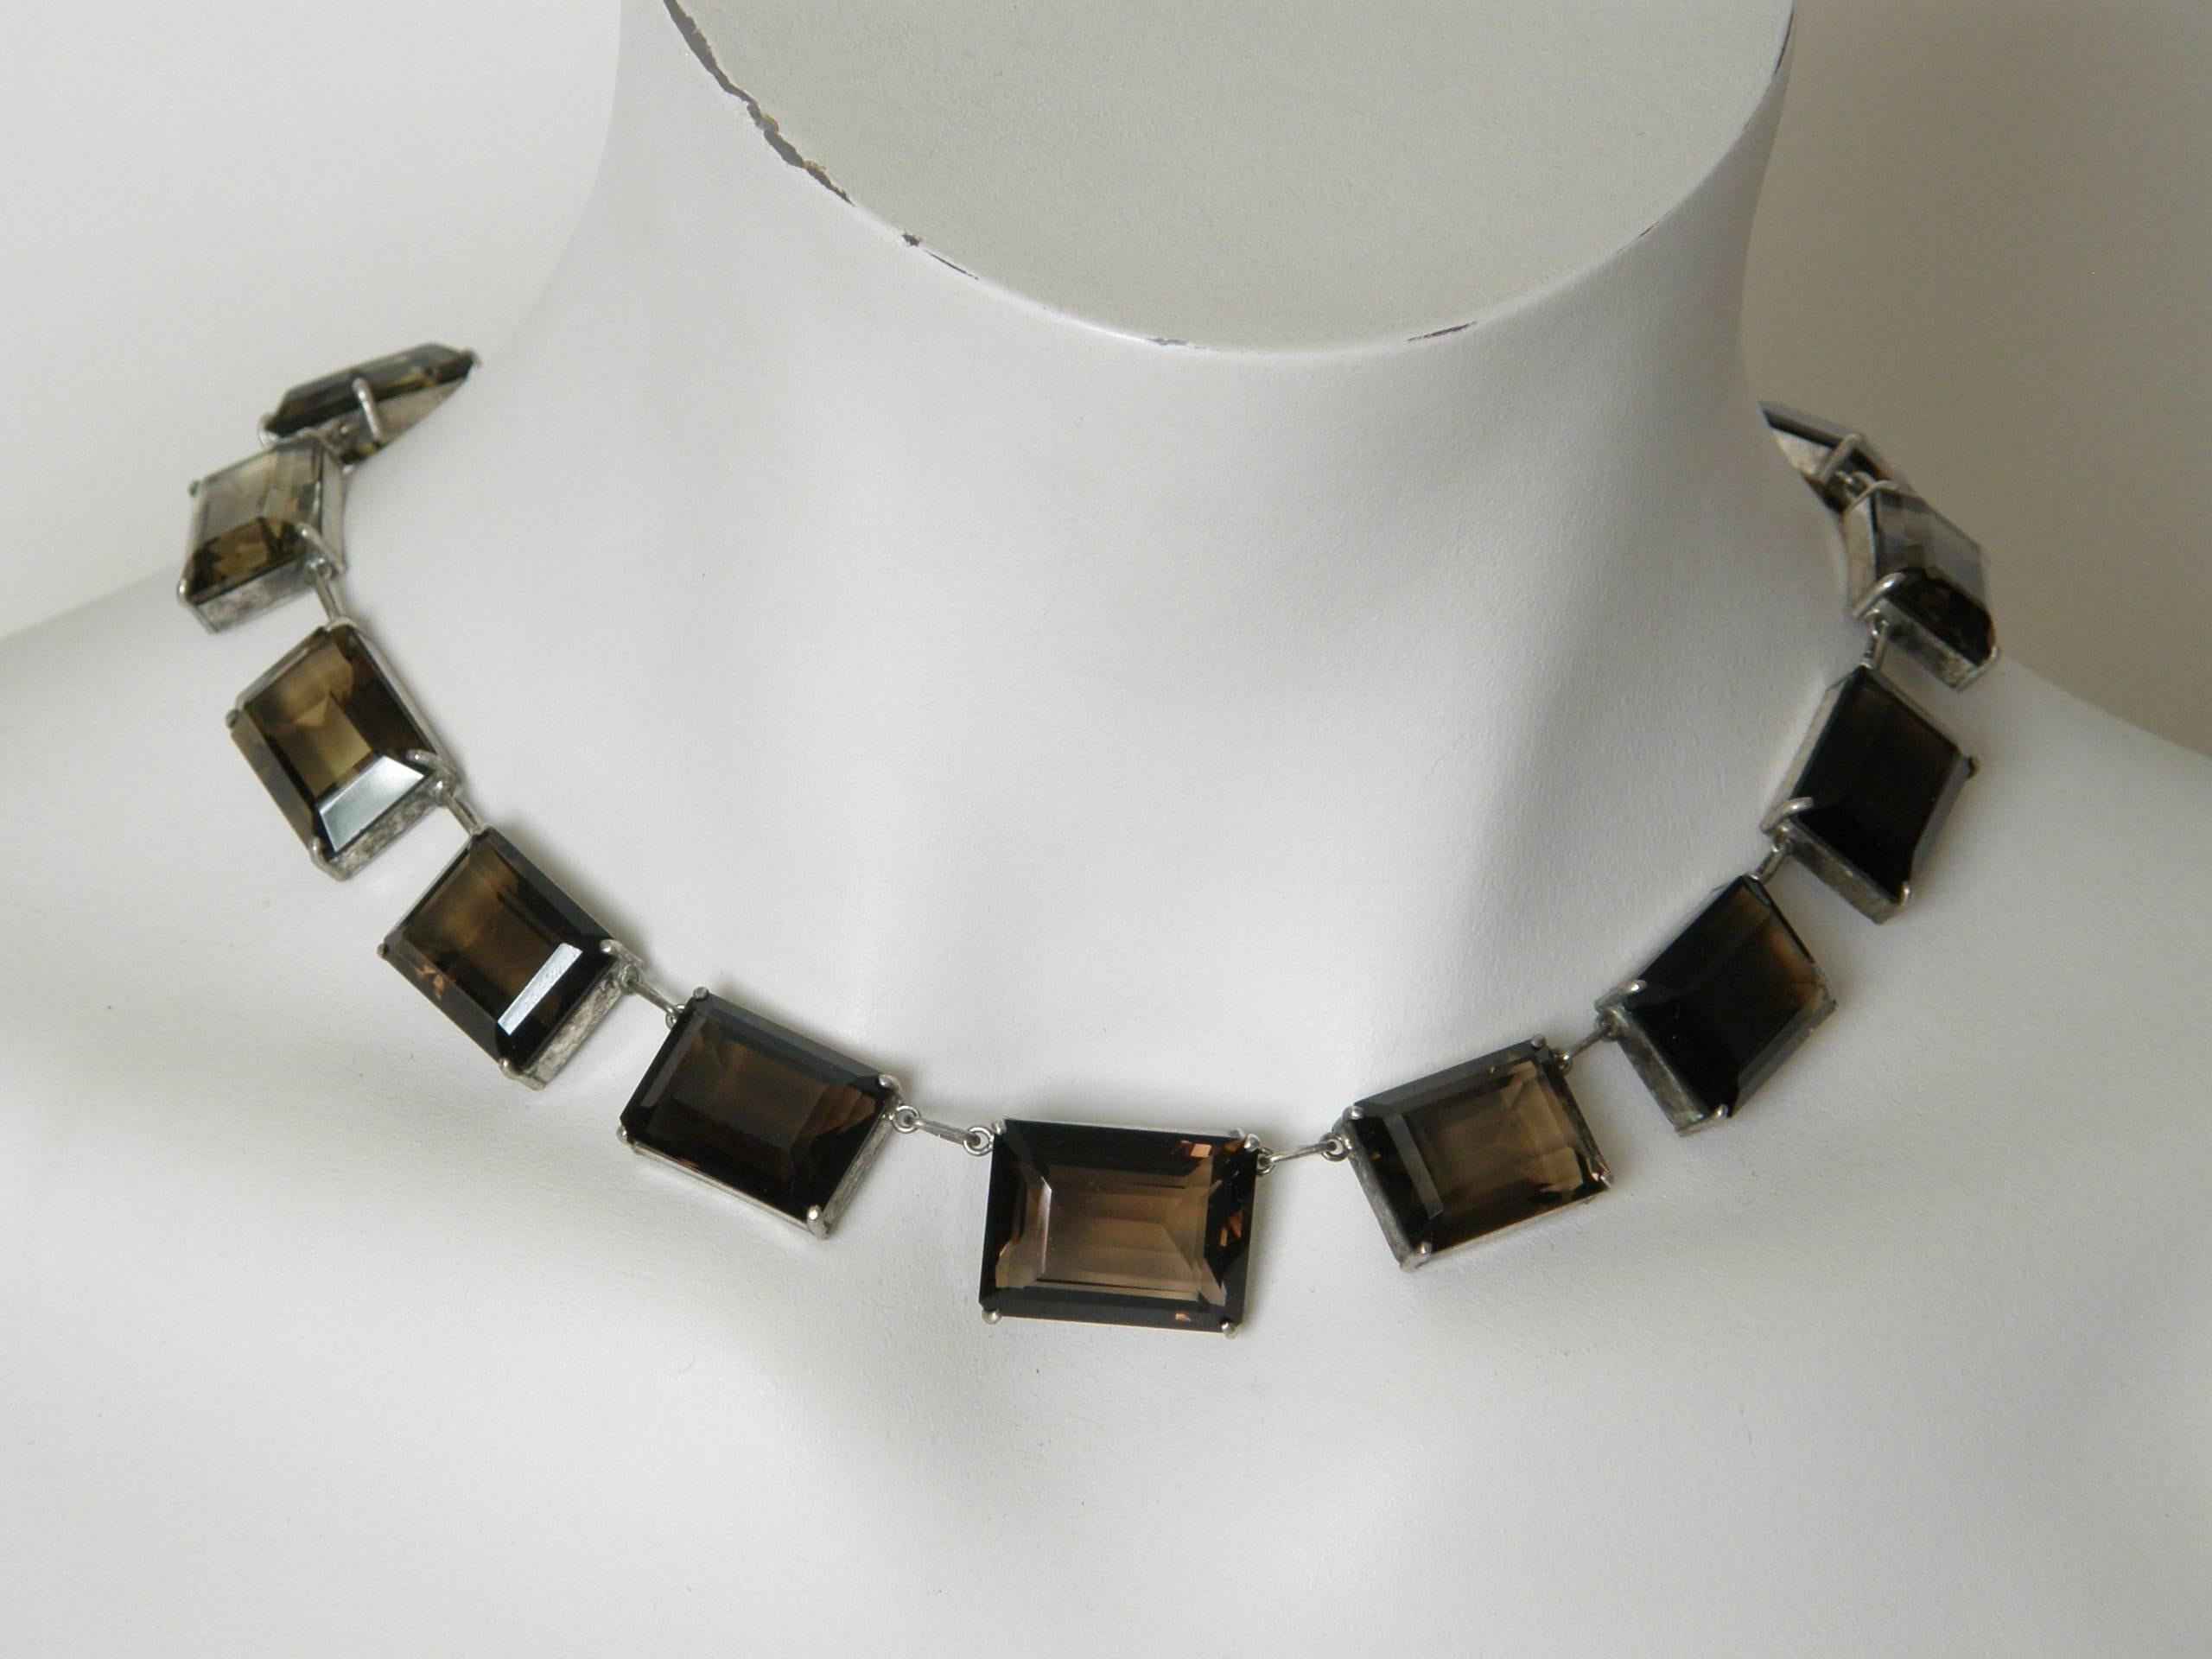 This impressive choker necklace has fifteen links with emerald cut smoky quartz set in sterling. These natural stones vary in size and also a bit in color and translucency. The clasp is marked 